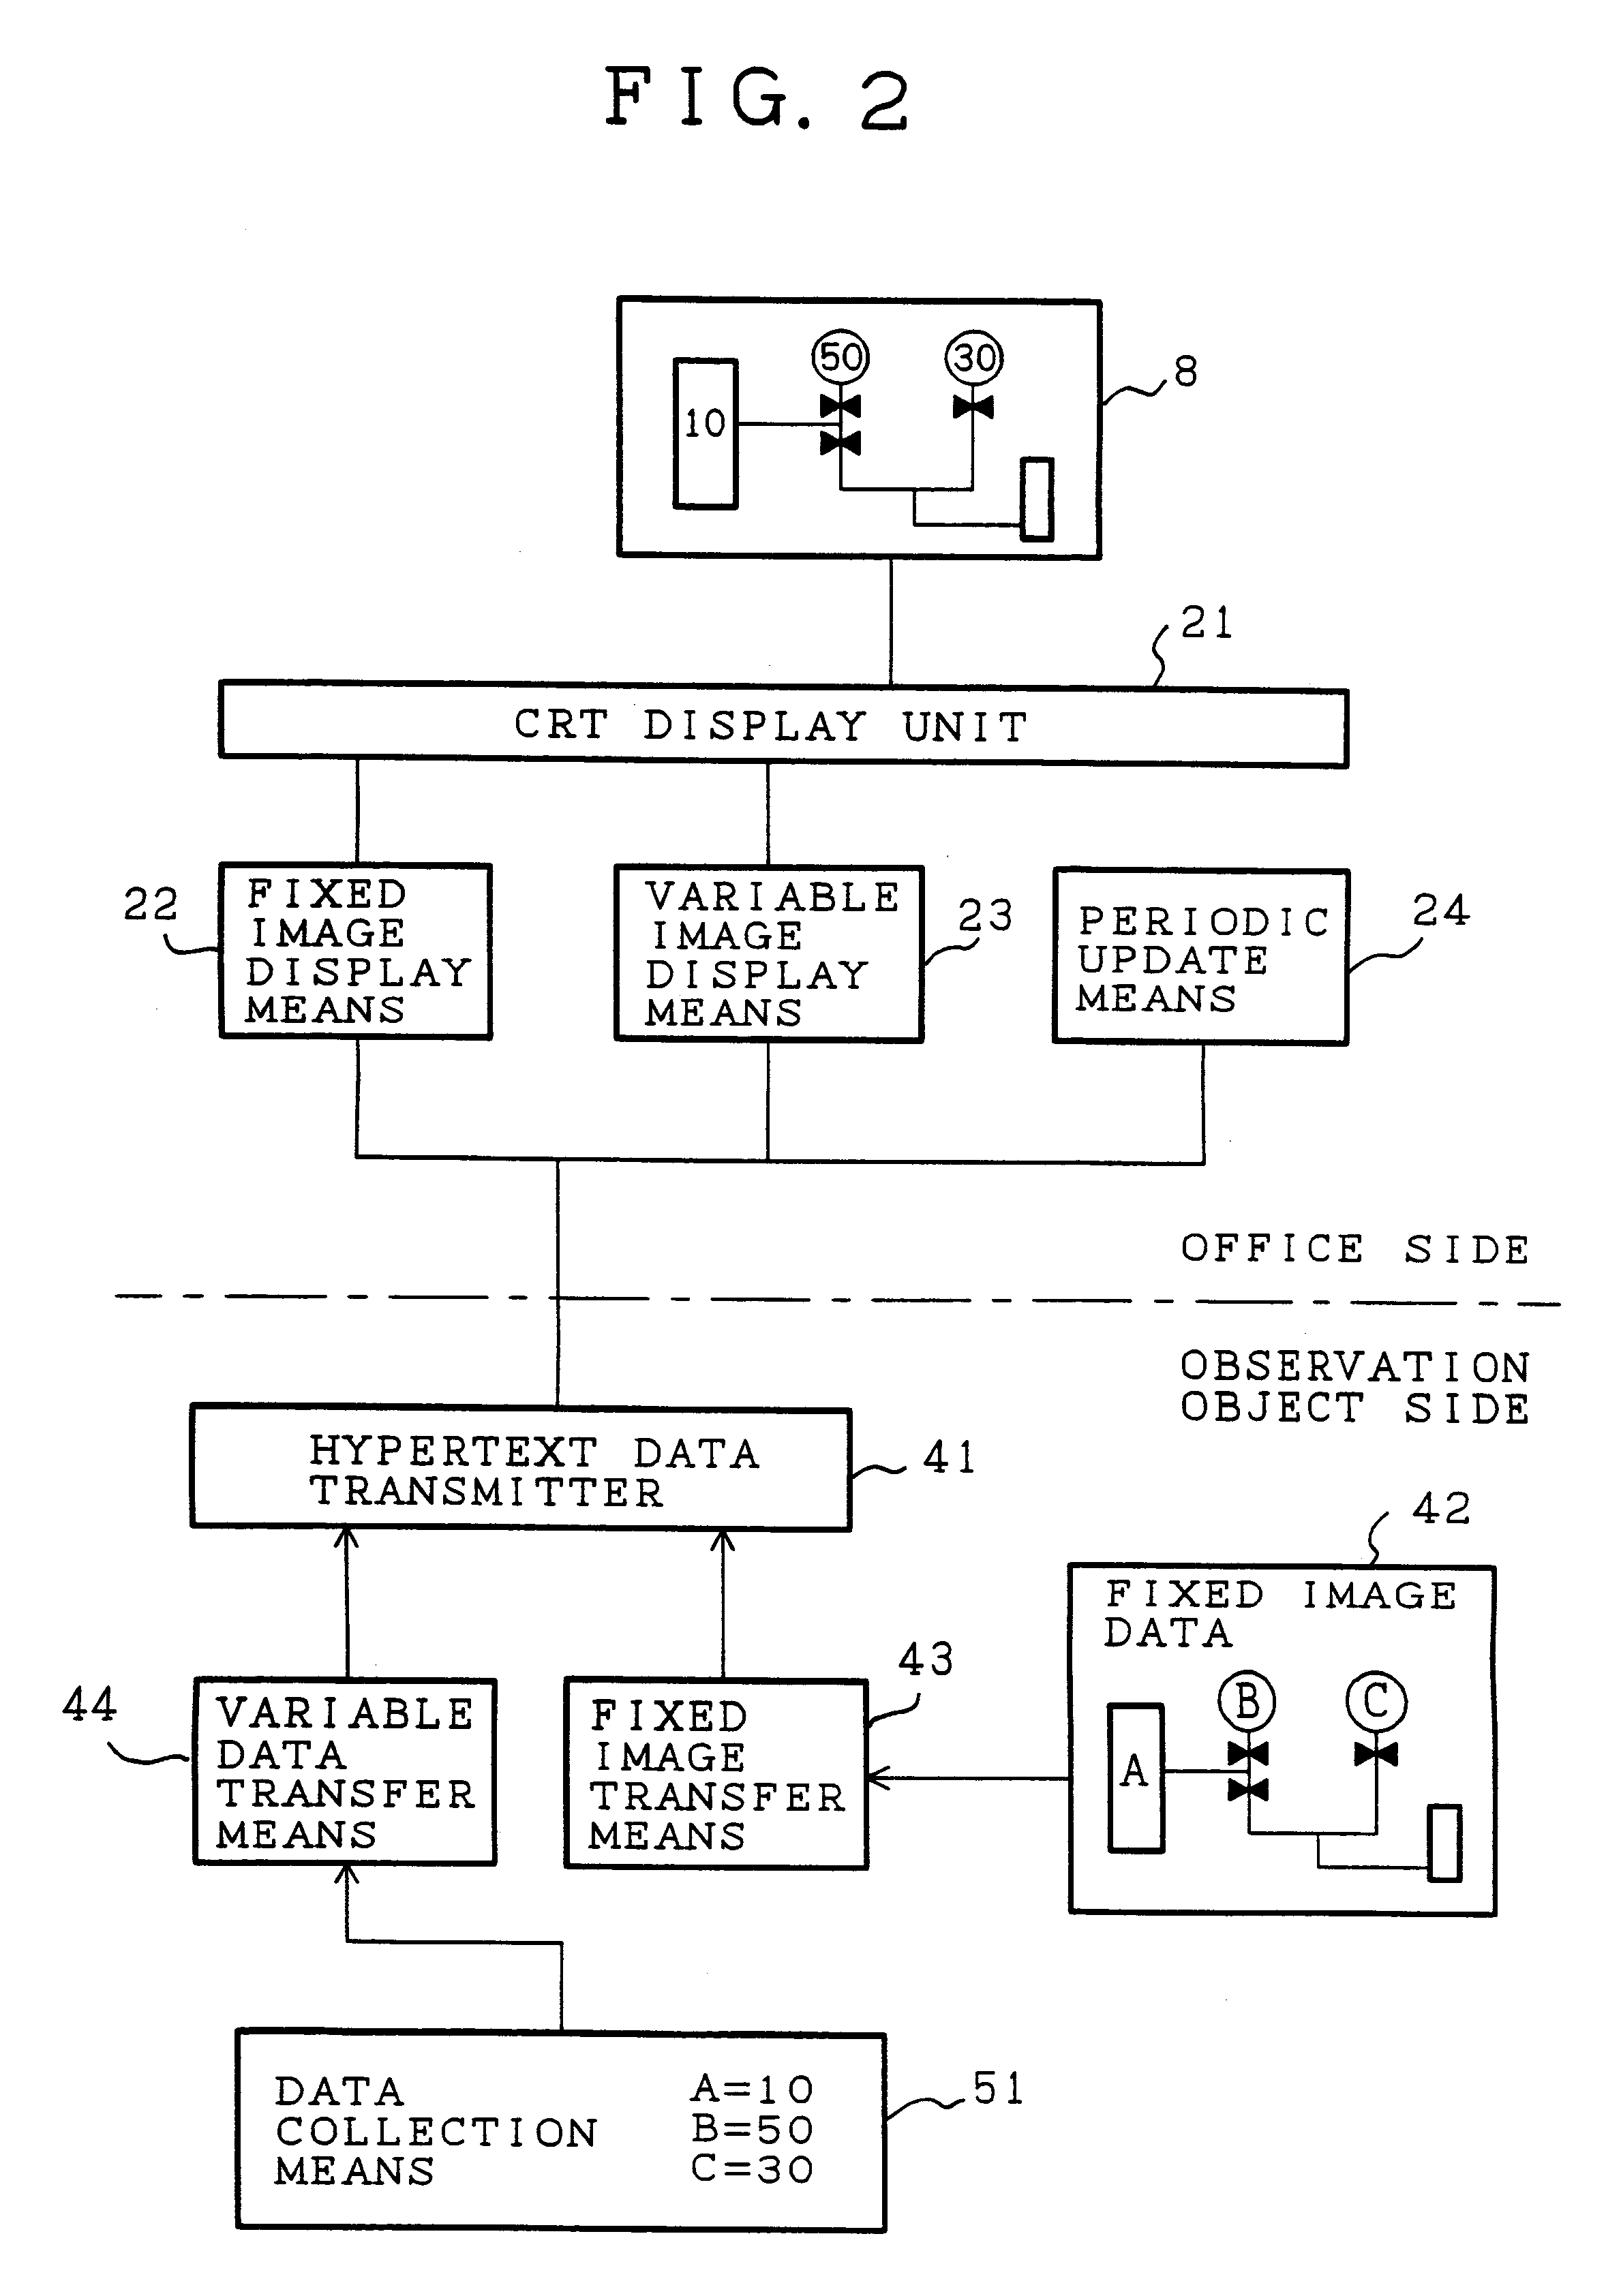 Remote observation system having transmission line for isolating local area network at data gathering site from remote monitoring site, and having provision for data request from remote monitoring site via the transmission line